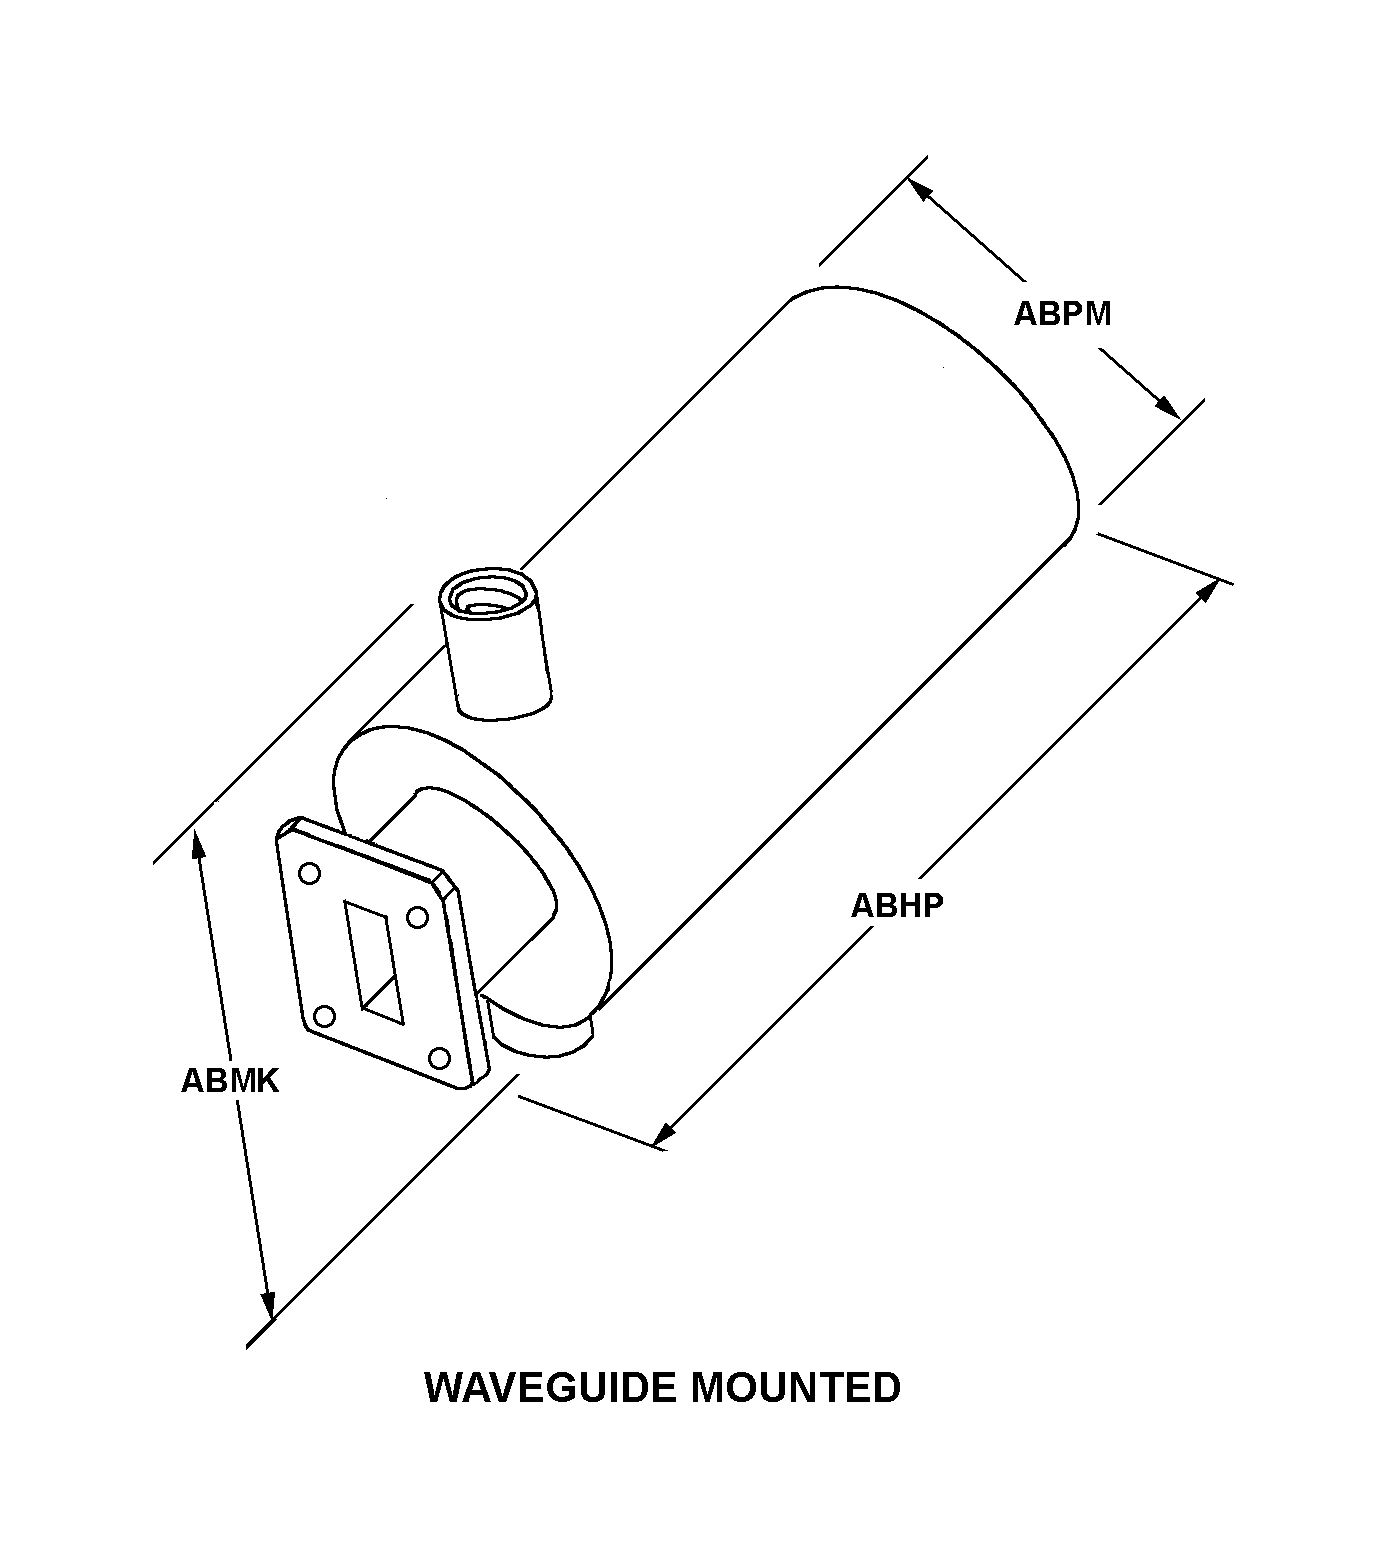 WAVEGUIDE MOUNTED style nsn 5985-00-431-6087